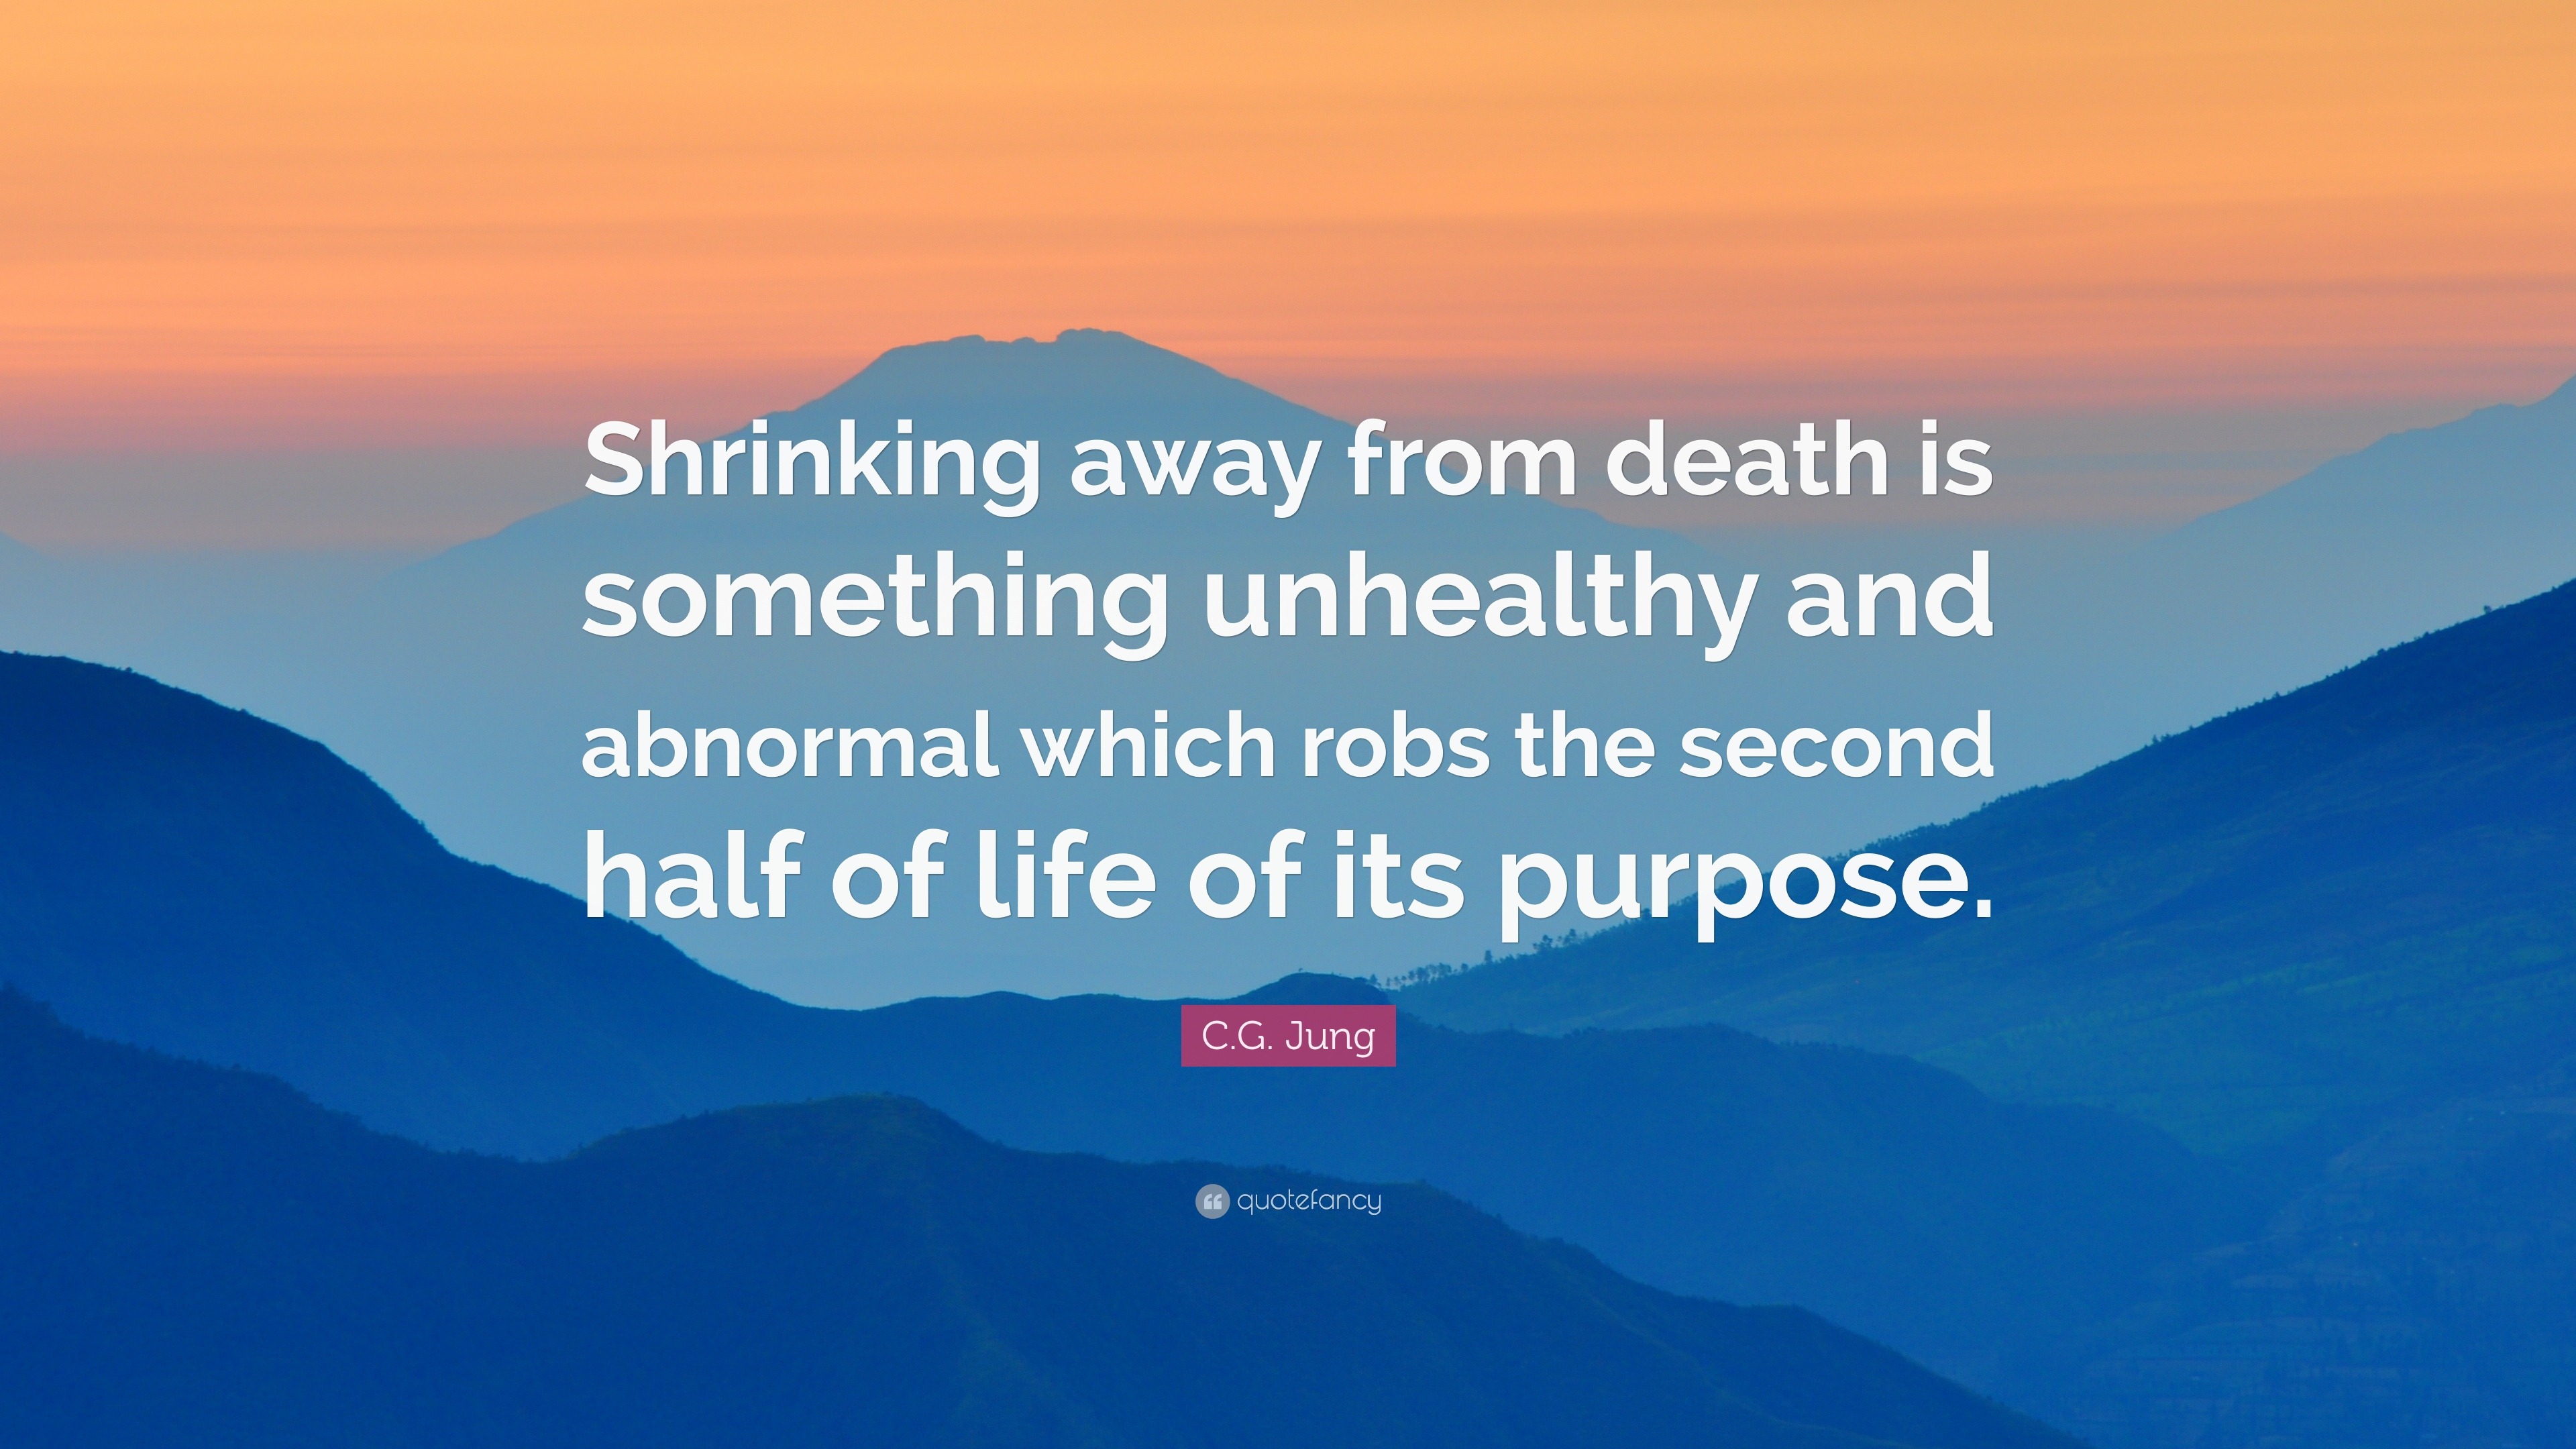 C.G. Jung Quote: “Shrinking away from death is something unhealthy and ...